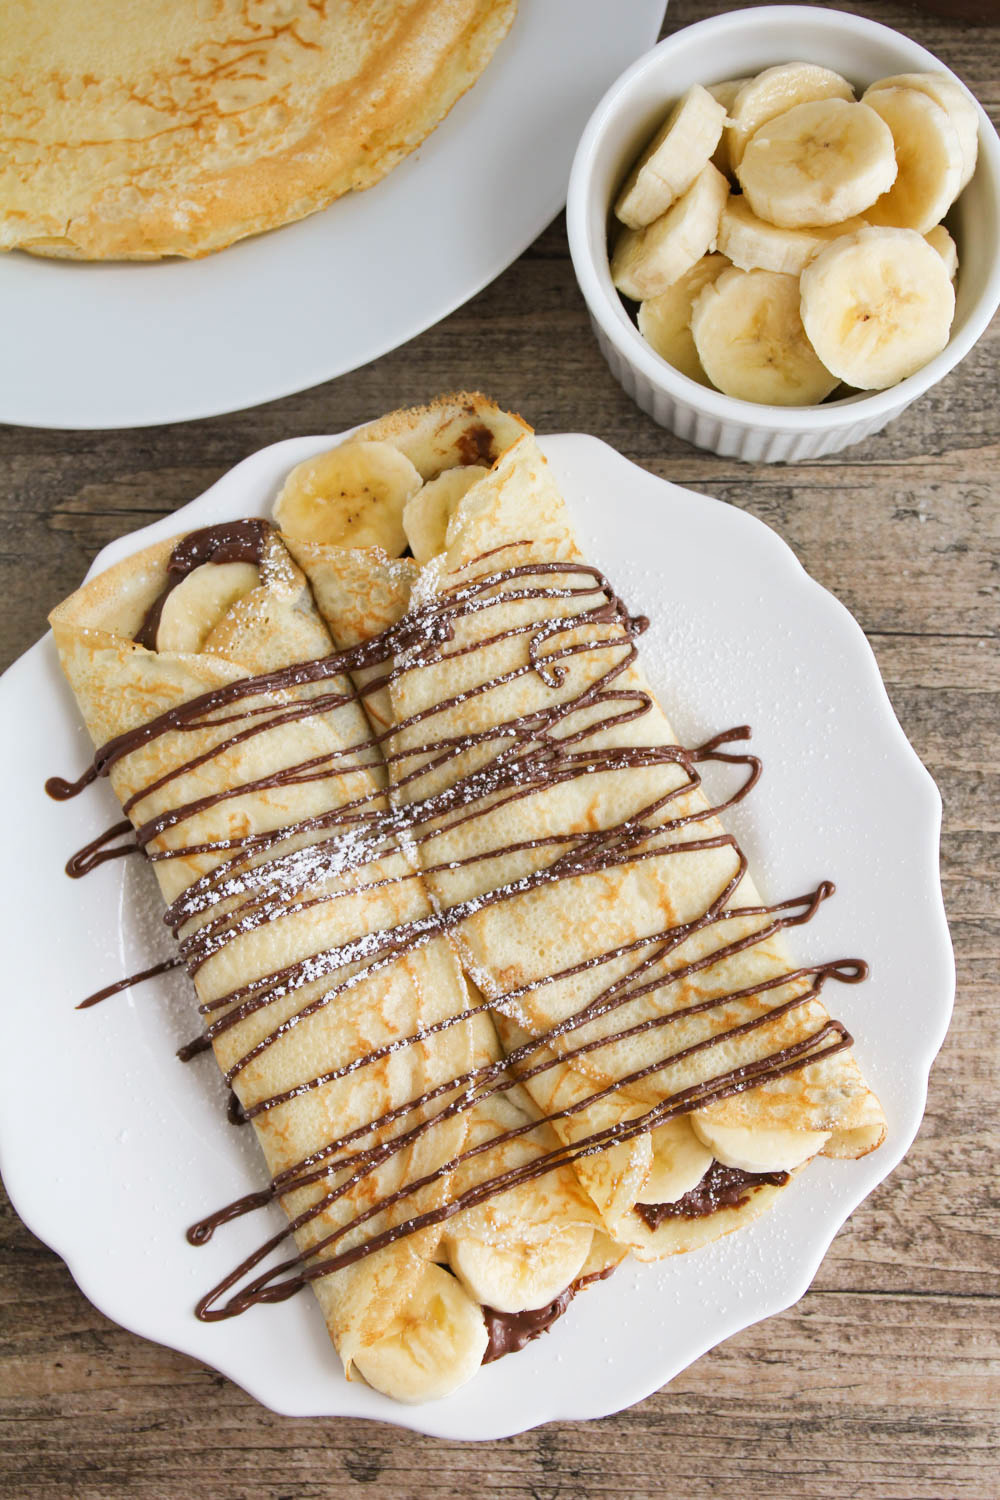 These nutella banana crepes are the perfect indulgent breakfast or dessert. Super easy to make and so delicious!